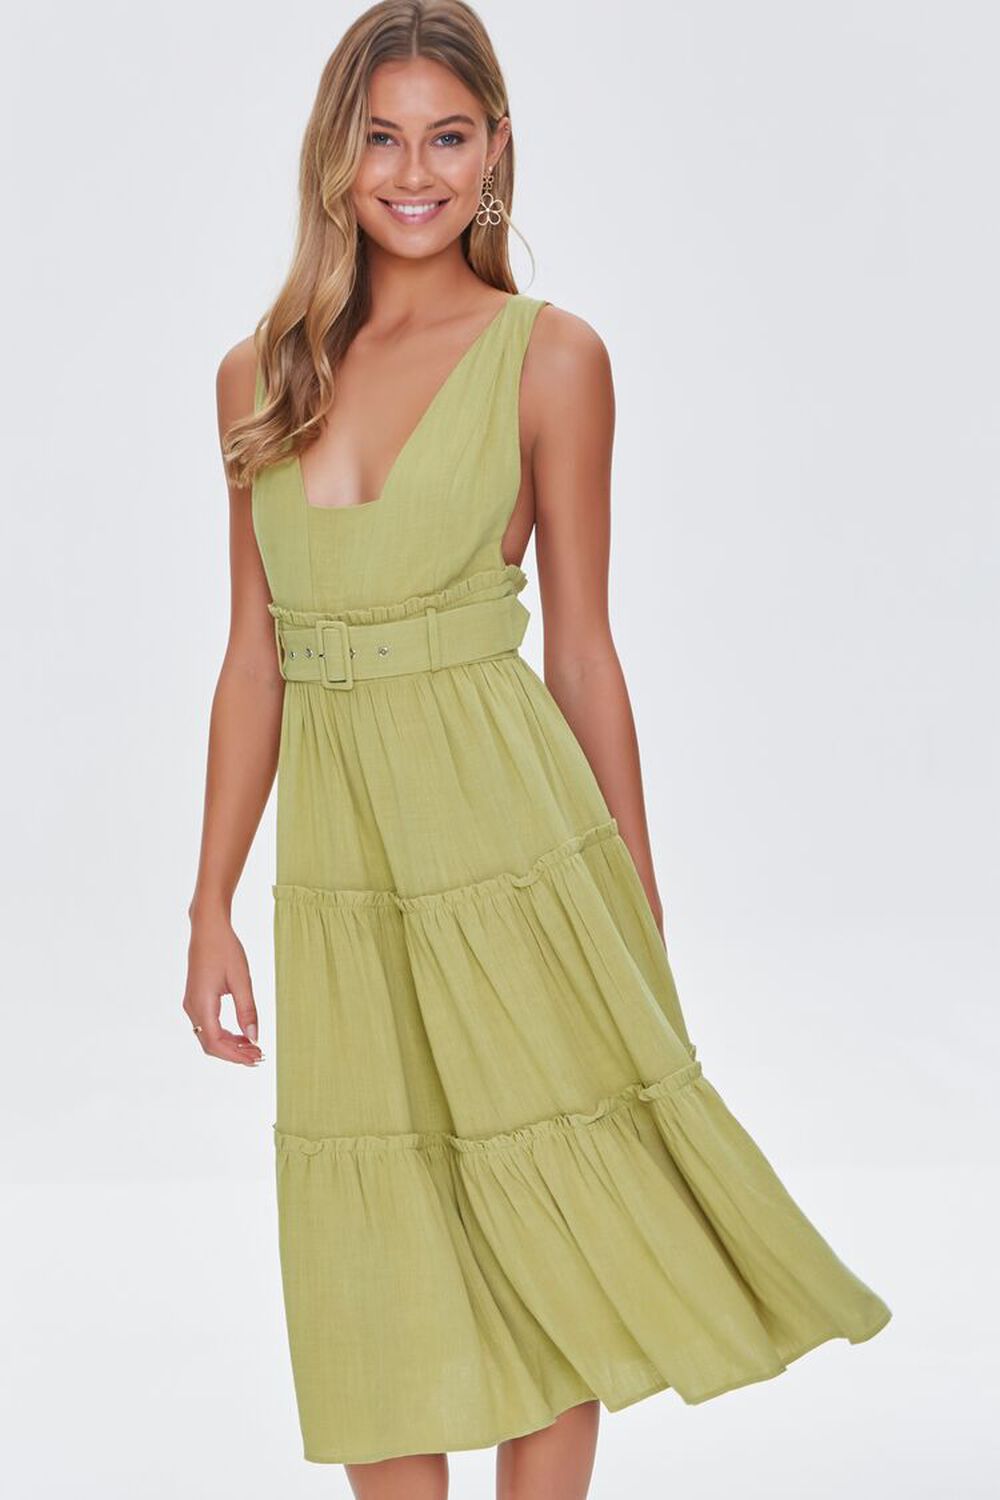 LIGHT GREEN Belted Plunging Flounce Dress, image 1